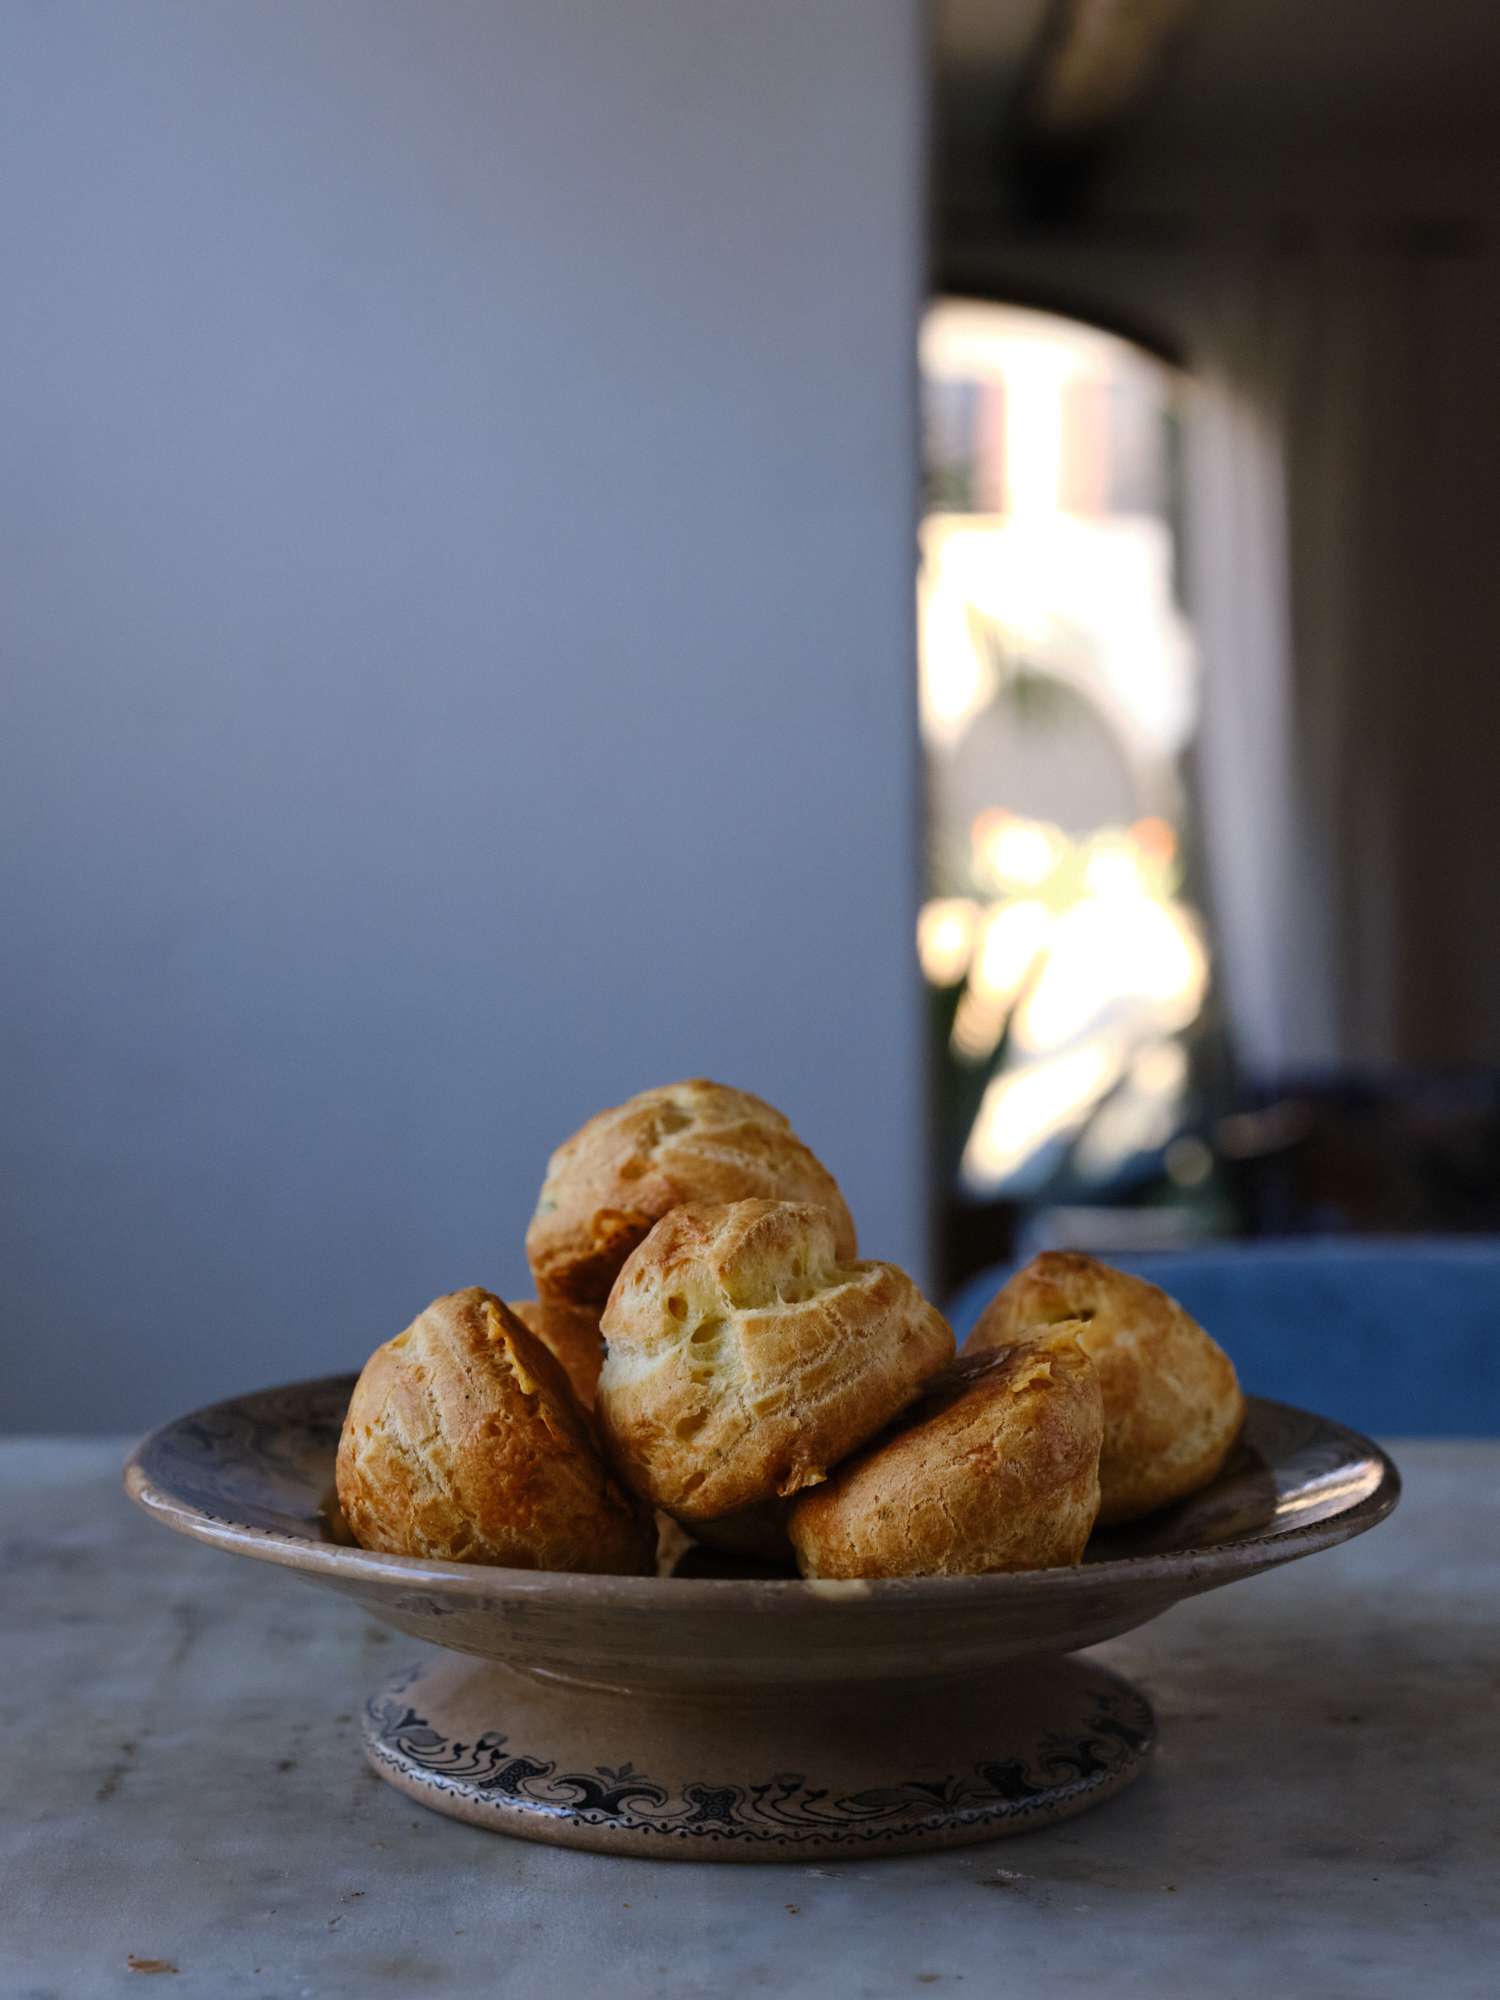 Gougeres piled high on a marble table